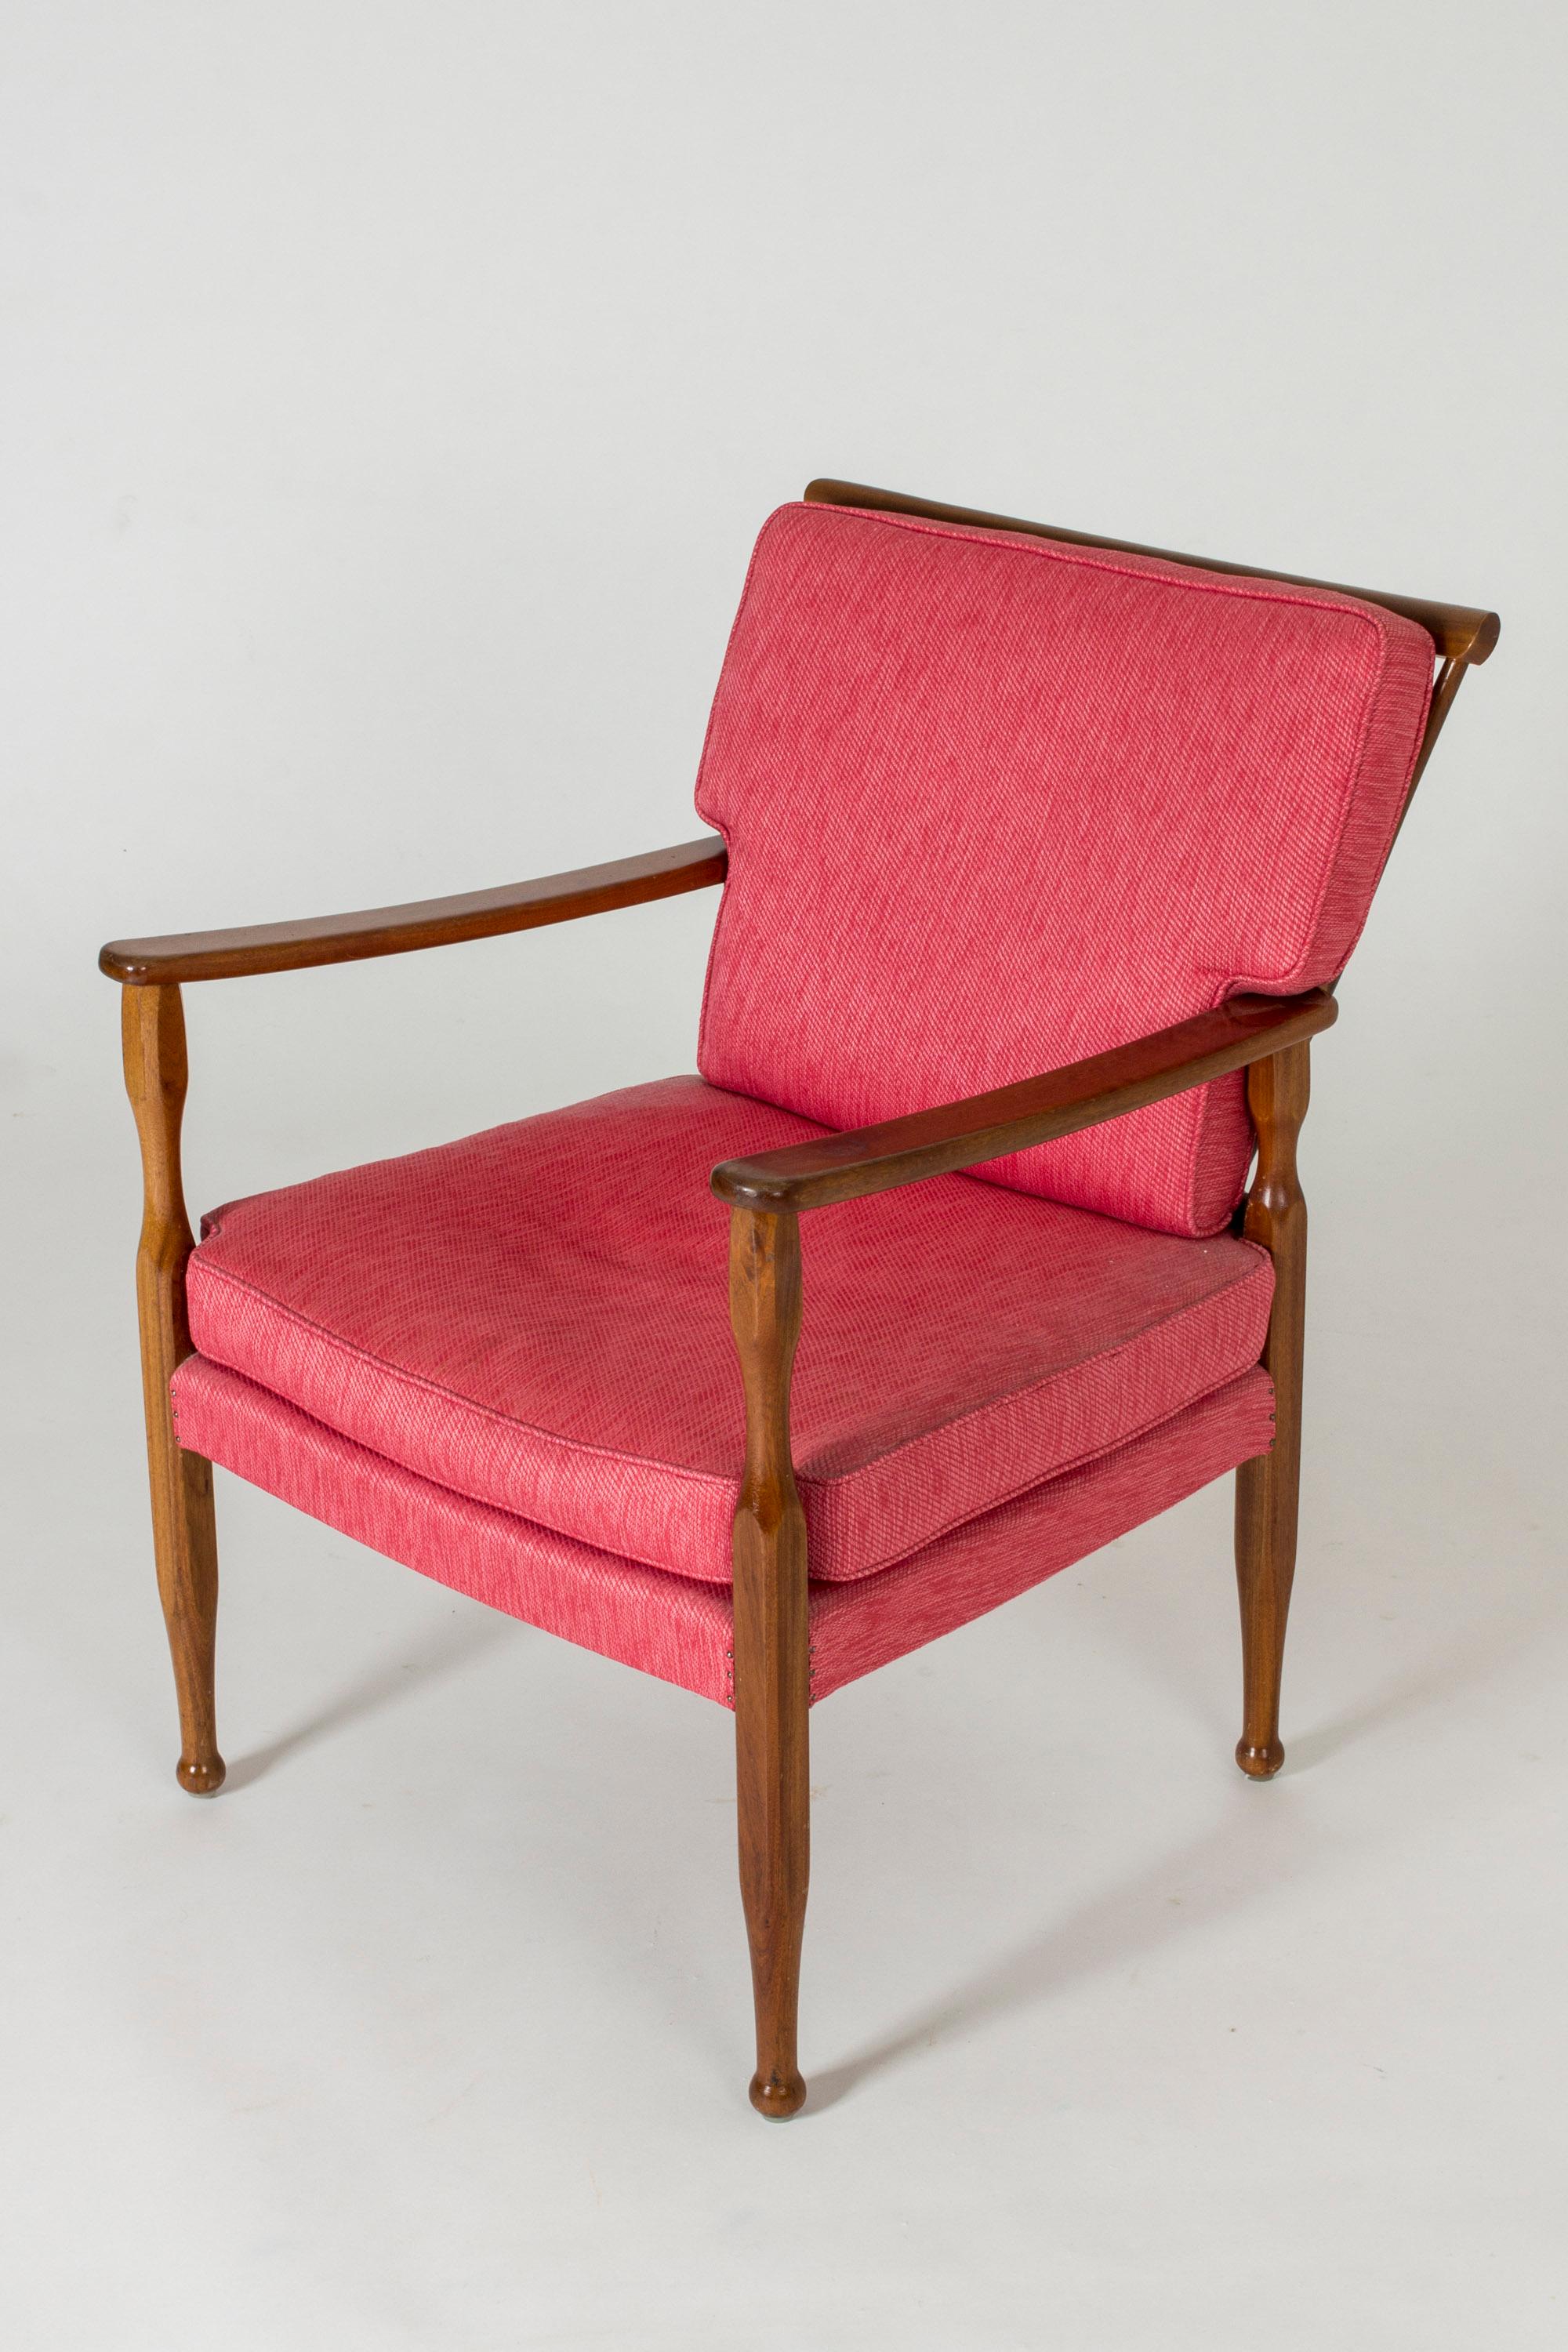 Elegant mahogany lounge chair by Josef Frank, with beautifully sculpted legs with knoblike feet. Warm, polished wood combines very nicely with the saturated pink upholstery.